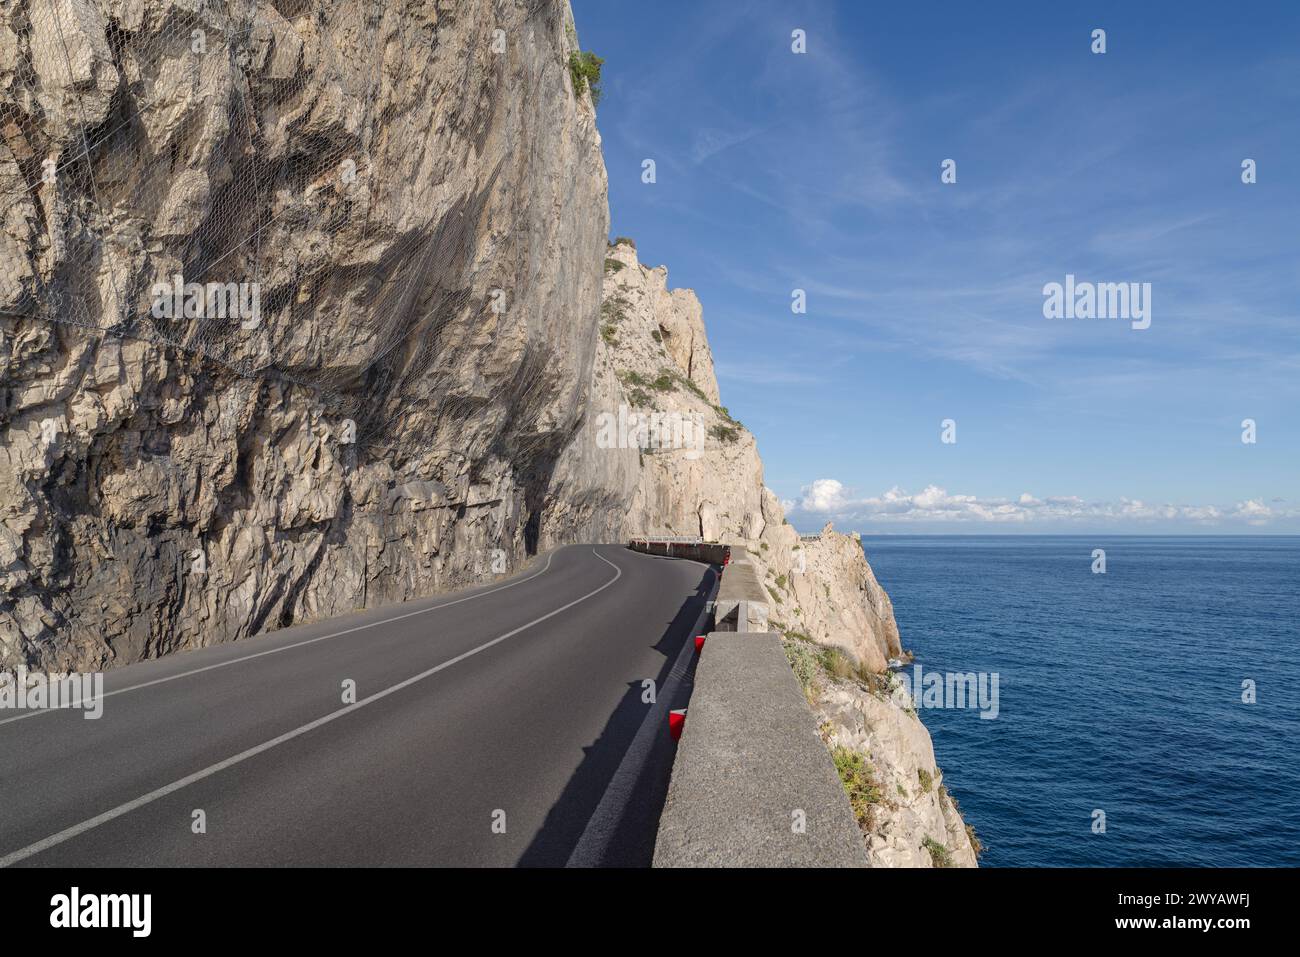 The stunning high altitude cliffside road along the coastline of Liguria, Italy Stock Photo